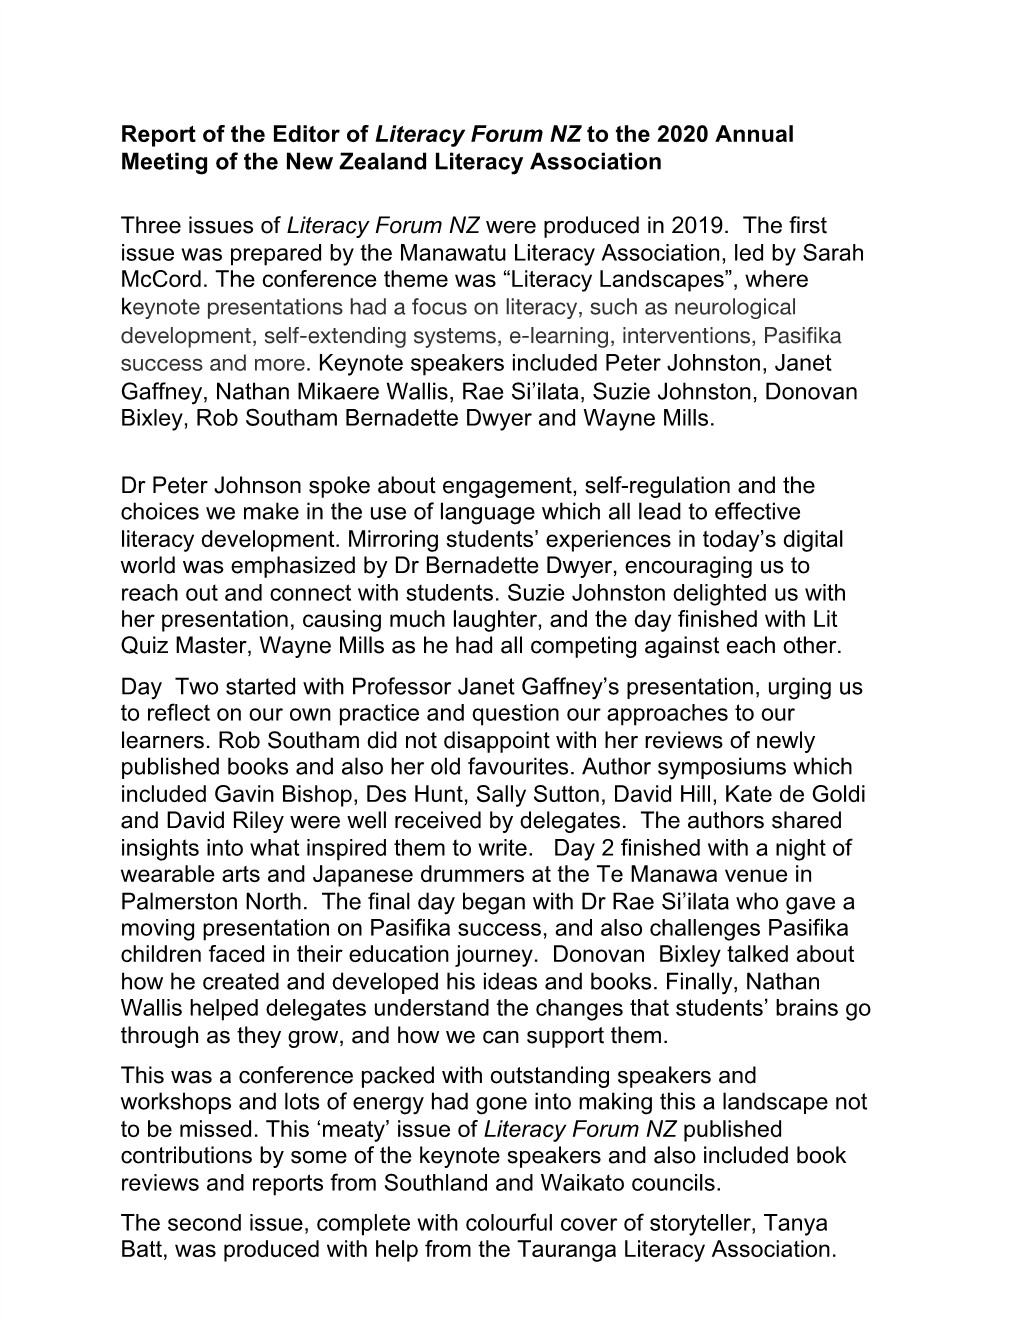 Report of the Editor of ​Literacy Forum NZ ​To the 2020 Annual